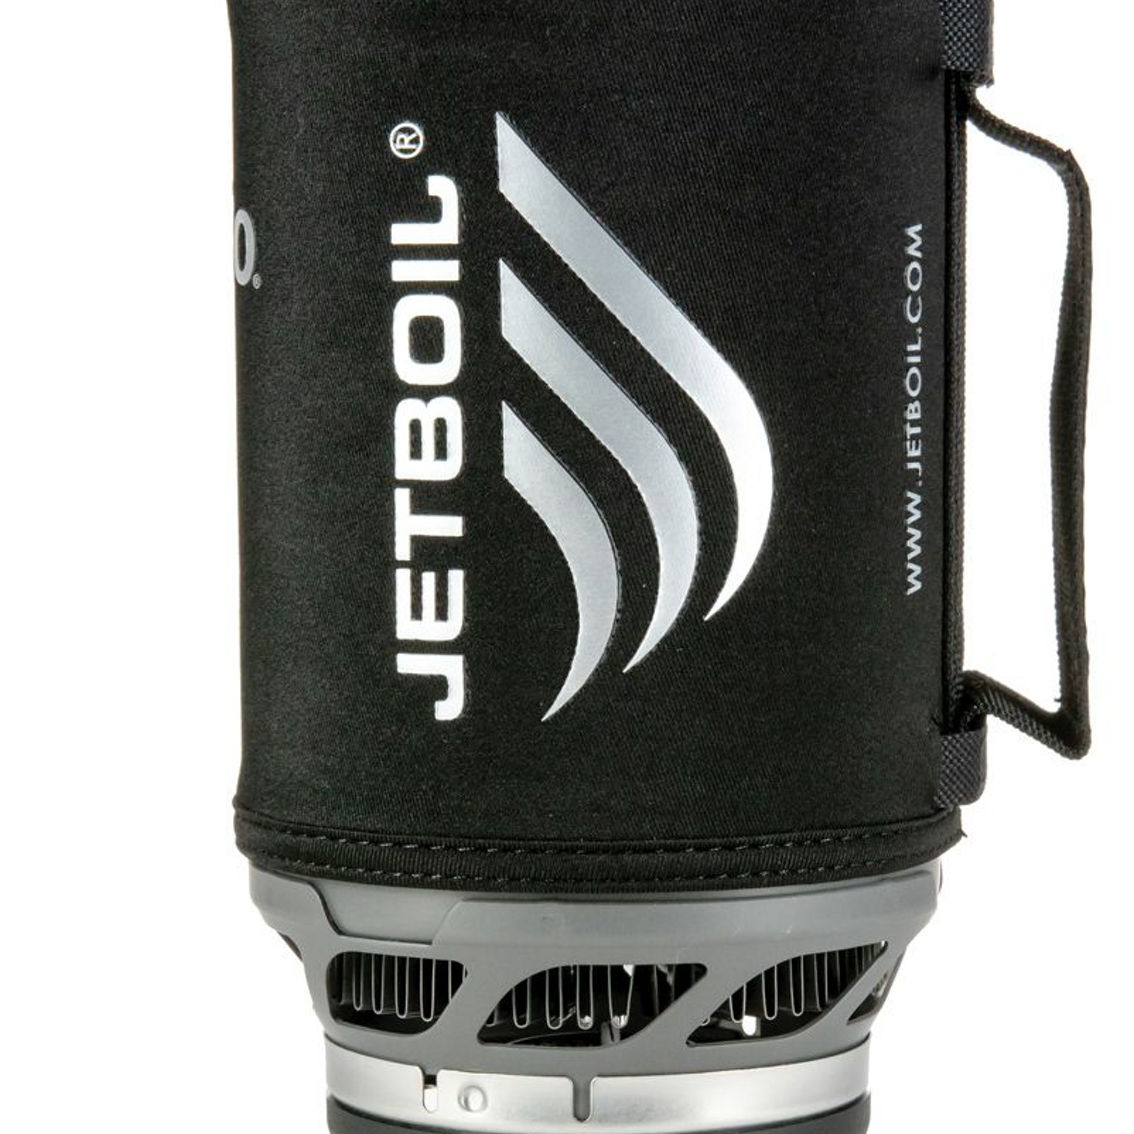 JETBOIL SUMO - Image 1 of 2